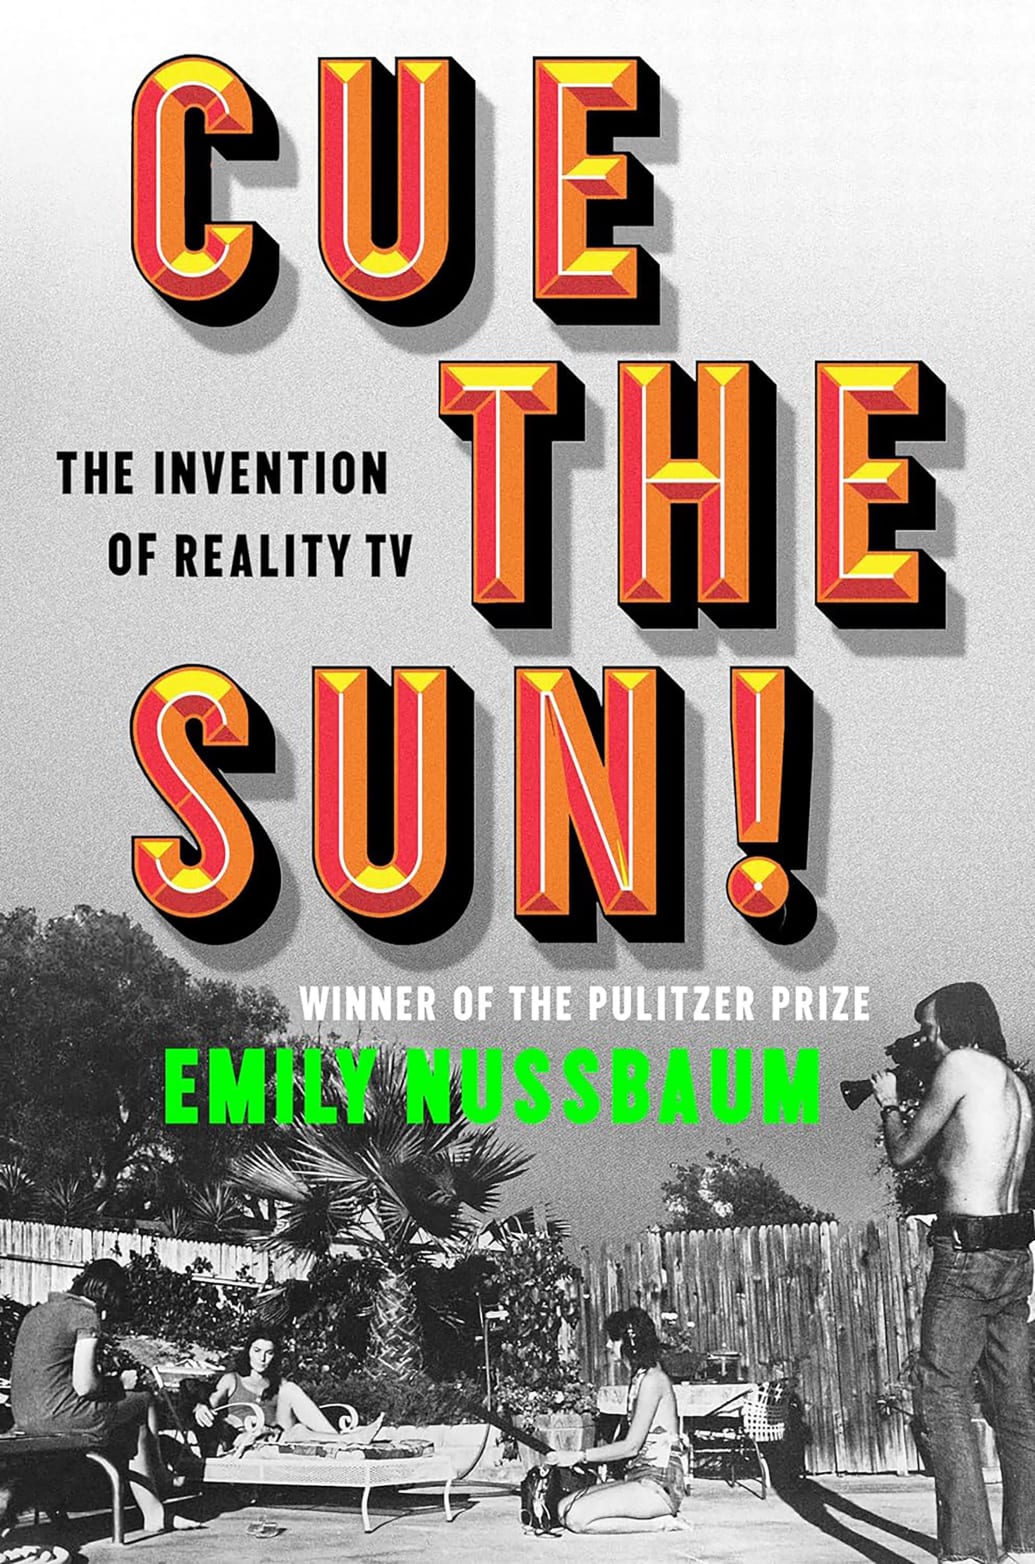 Book cover for Emily Nussbaum's book